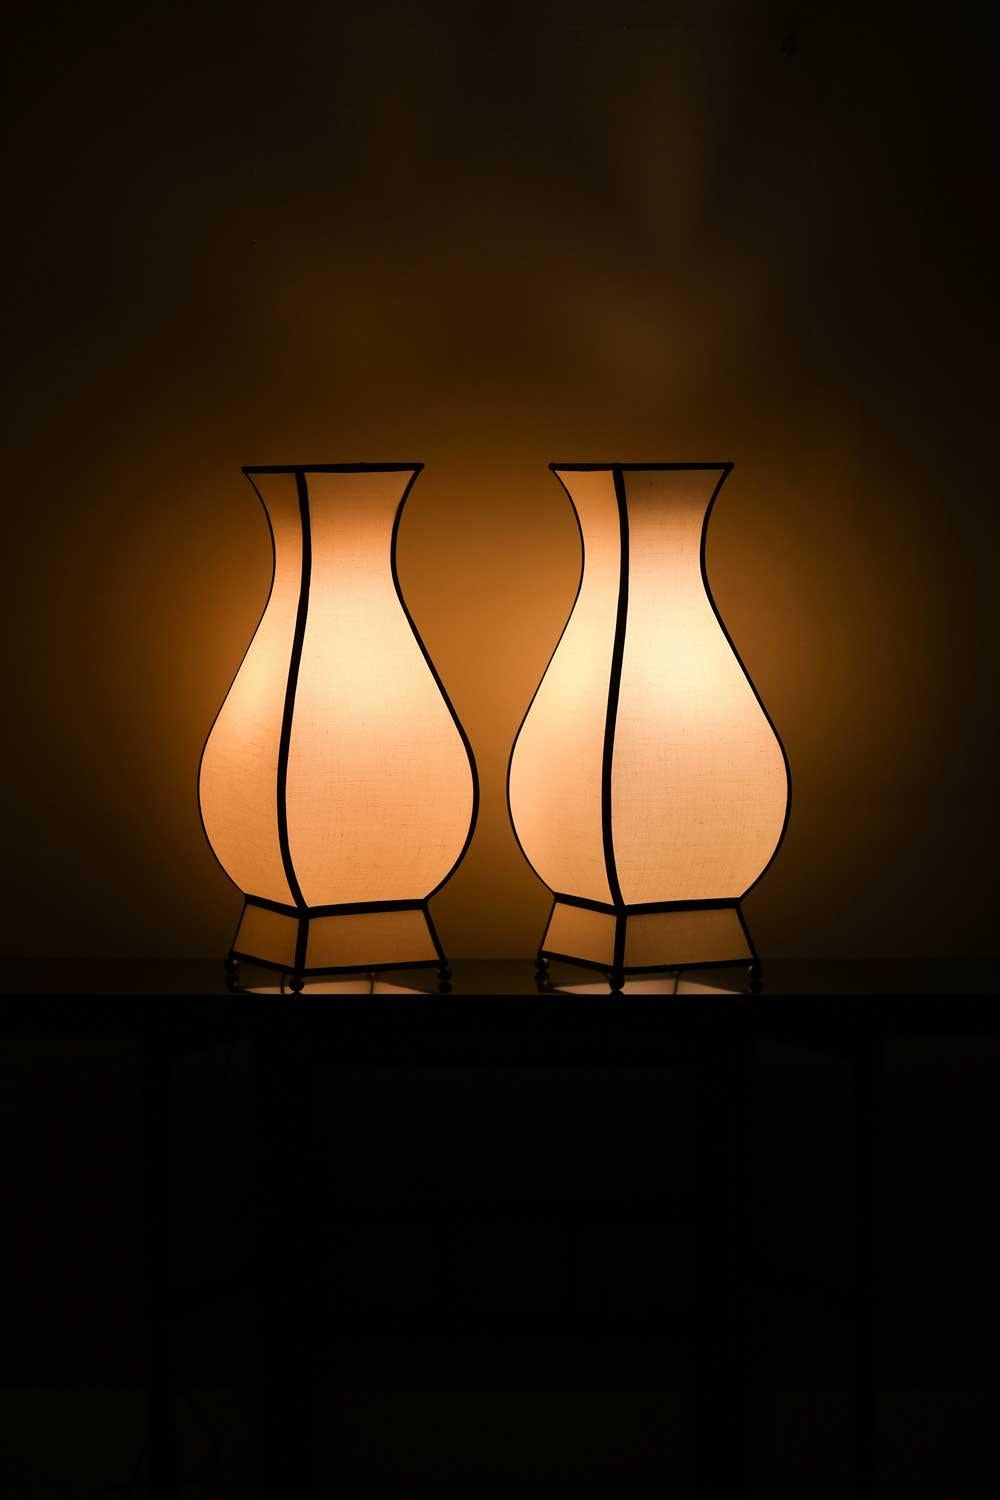 Pair of large “Molto Pagoda” lamps
PRODUCT DETAILS
Dimensions: 28w x 68h x 28d cm
Materials: fabric
Production: Italian manufacturing.